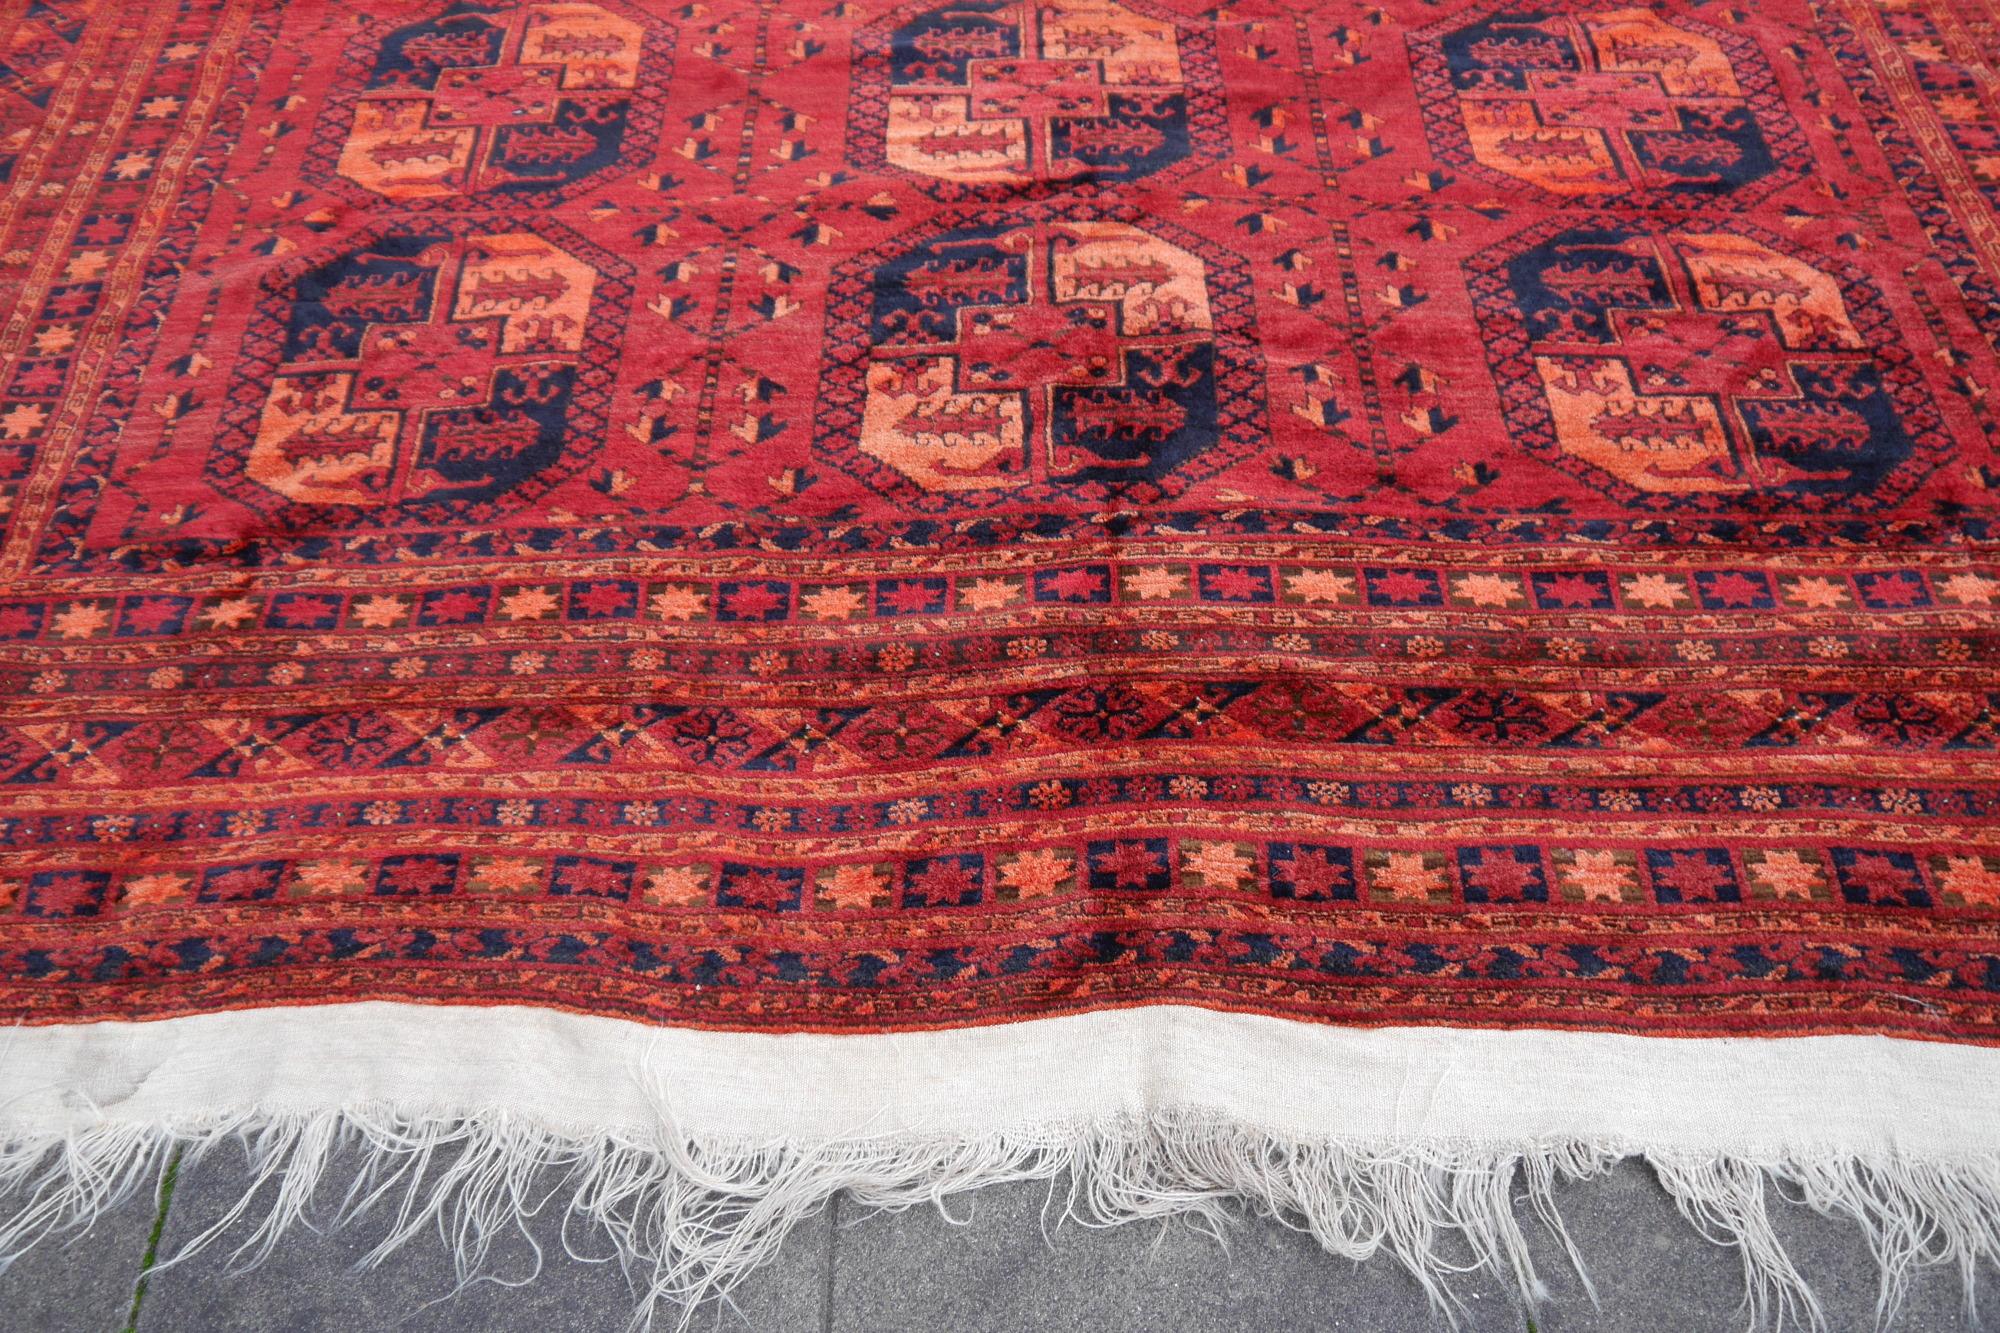 Wool Ersari rug 11.2 x 15.5 ft oversized tribal Turkoman hand knotted antique carpet For Sale